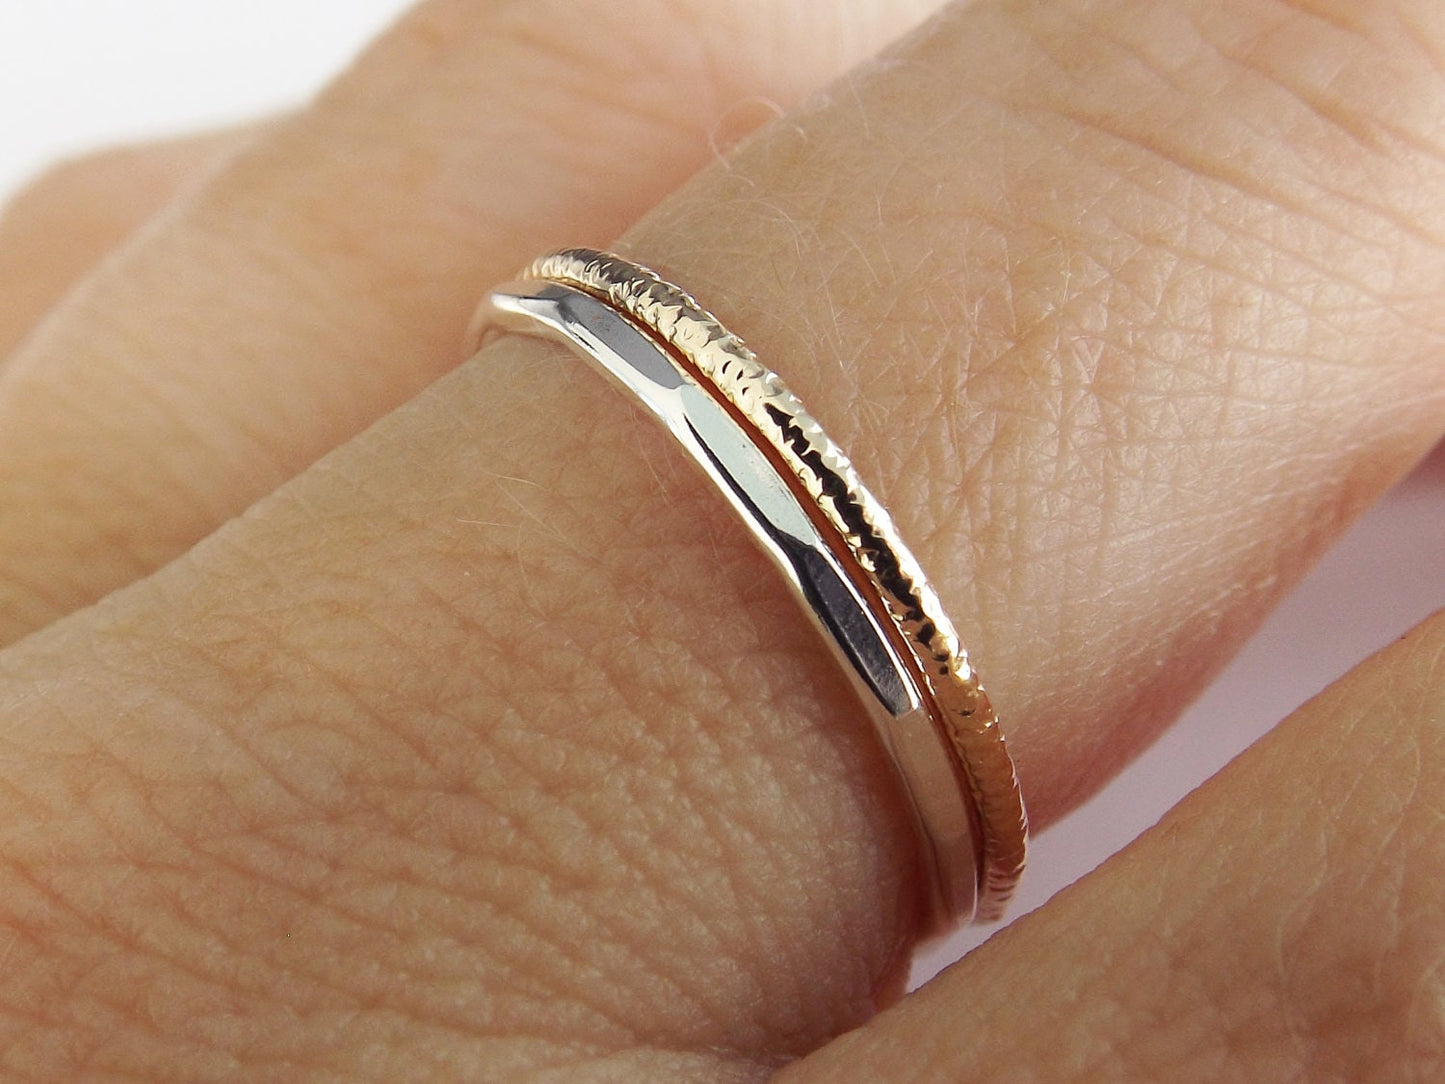 Simple Stacking Set,Mixed Metals Ring Set,Textured Rings,Faceted Ring,Boho Ring Set,Stacking Rings,Boho Chic,Yellow Gold filled and Sterling